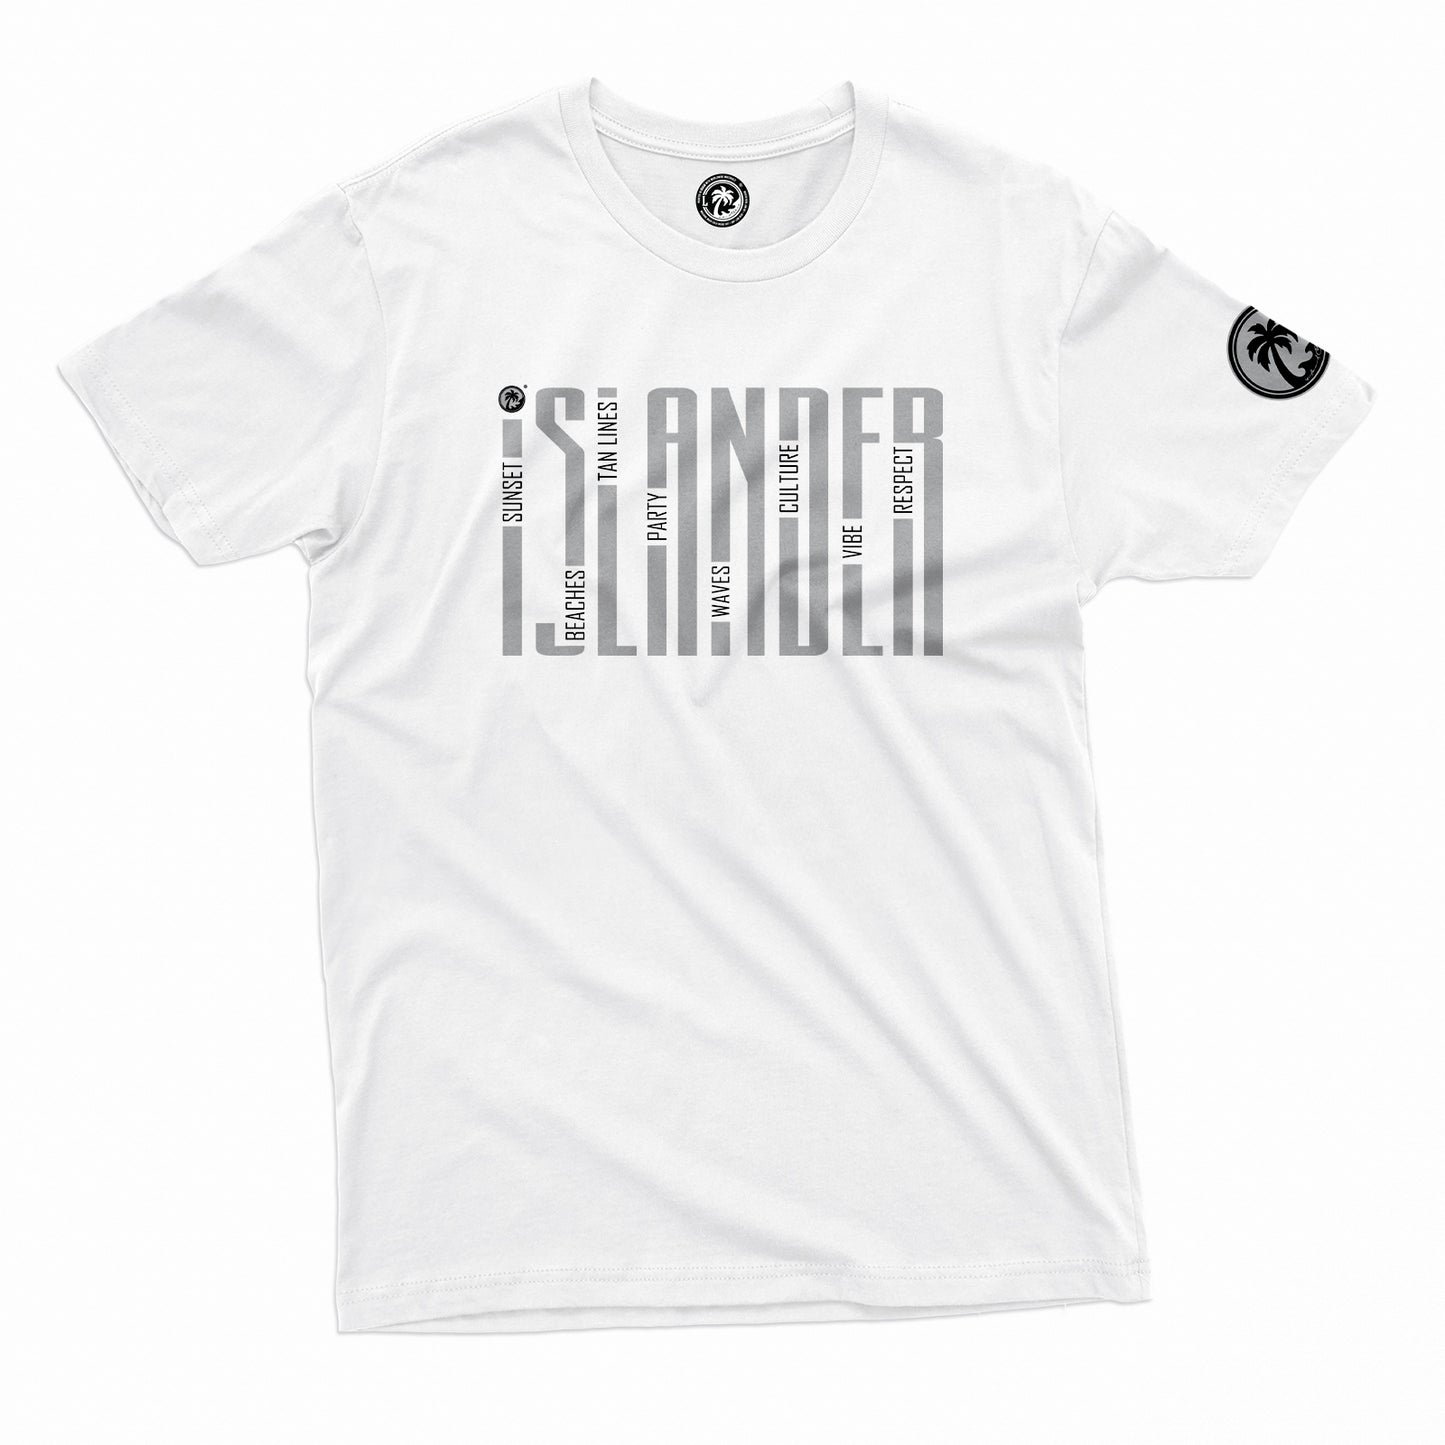 Islander Font Stretched White Tee